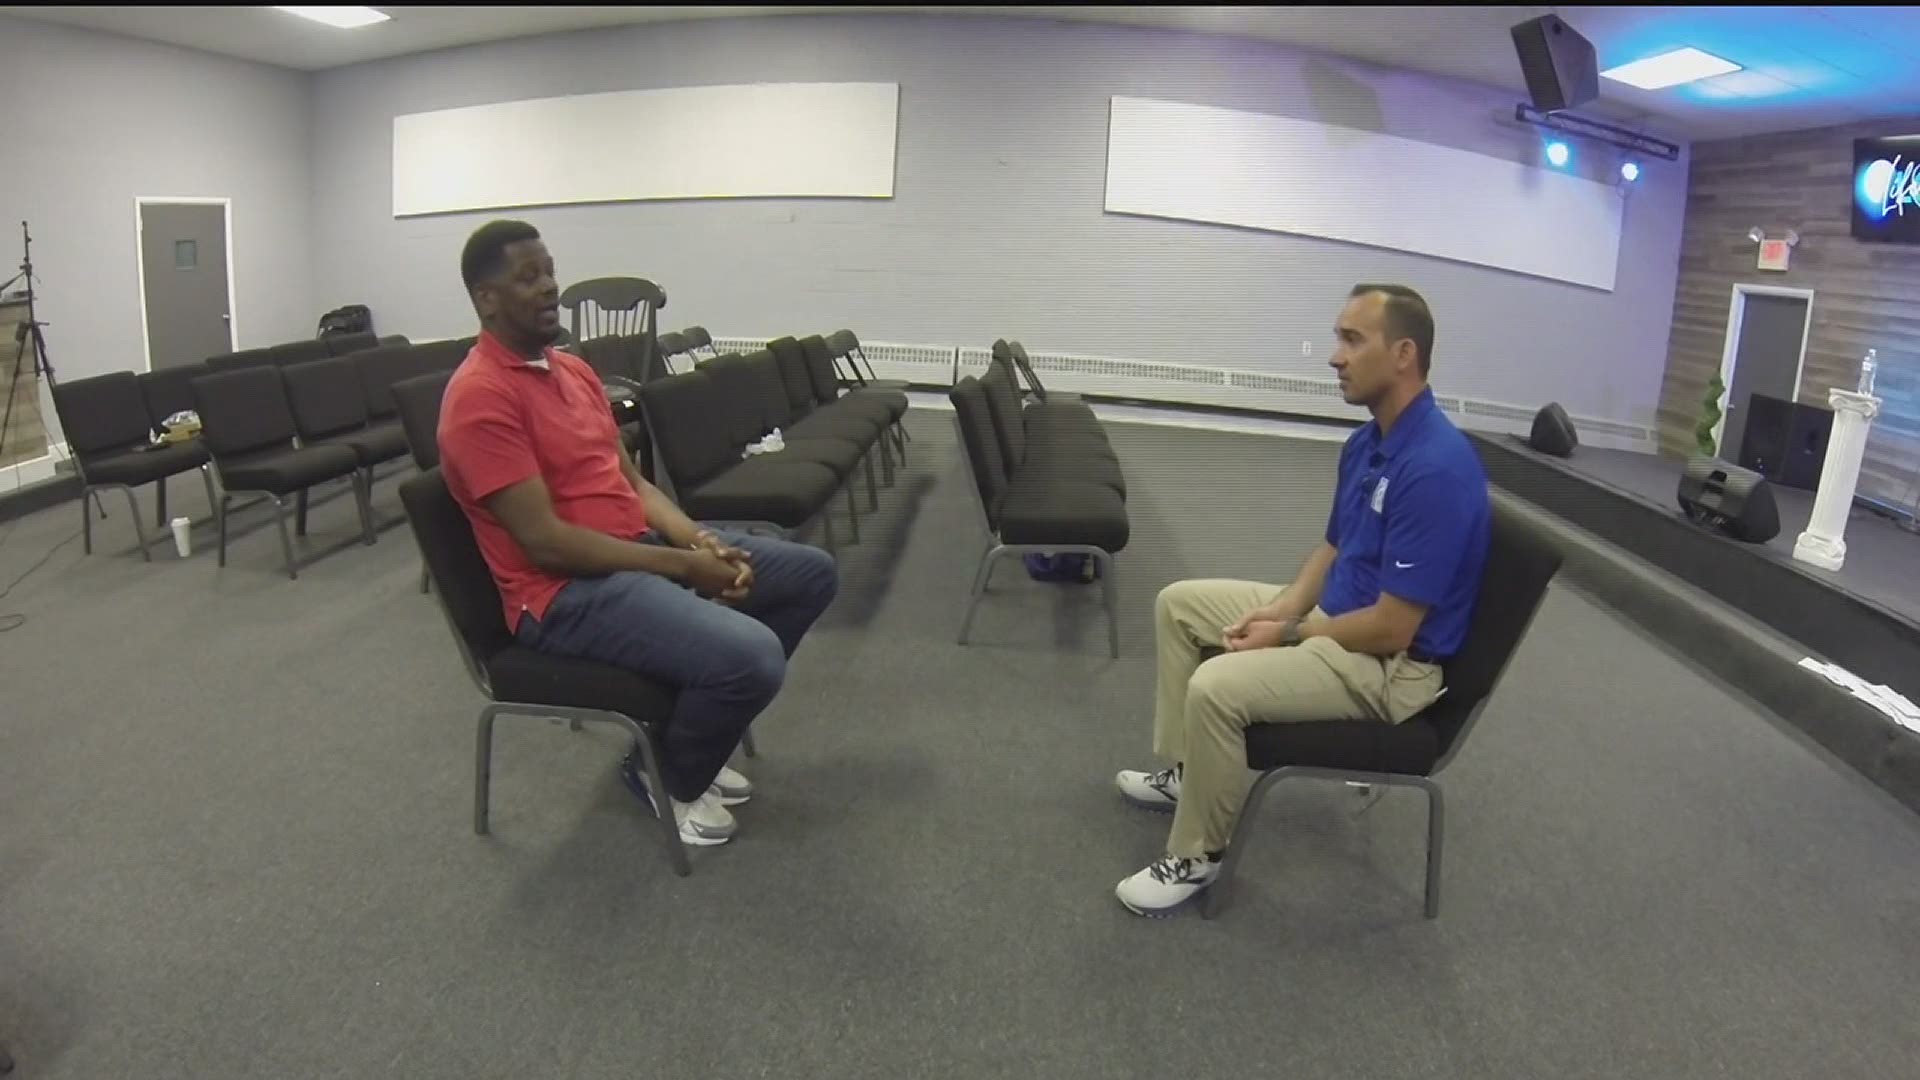 A conversation with Marc Polite, a Basketball Coach at Davenport North, about racial injustice. Part 1.